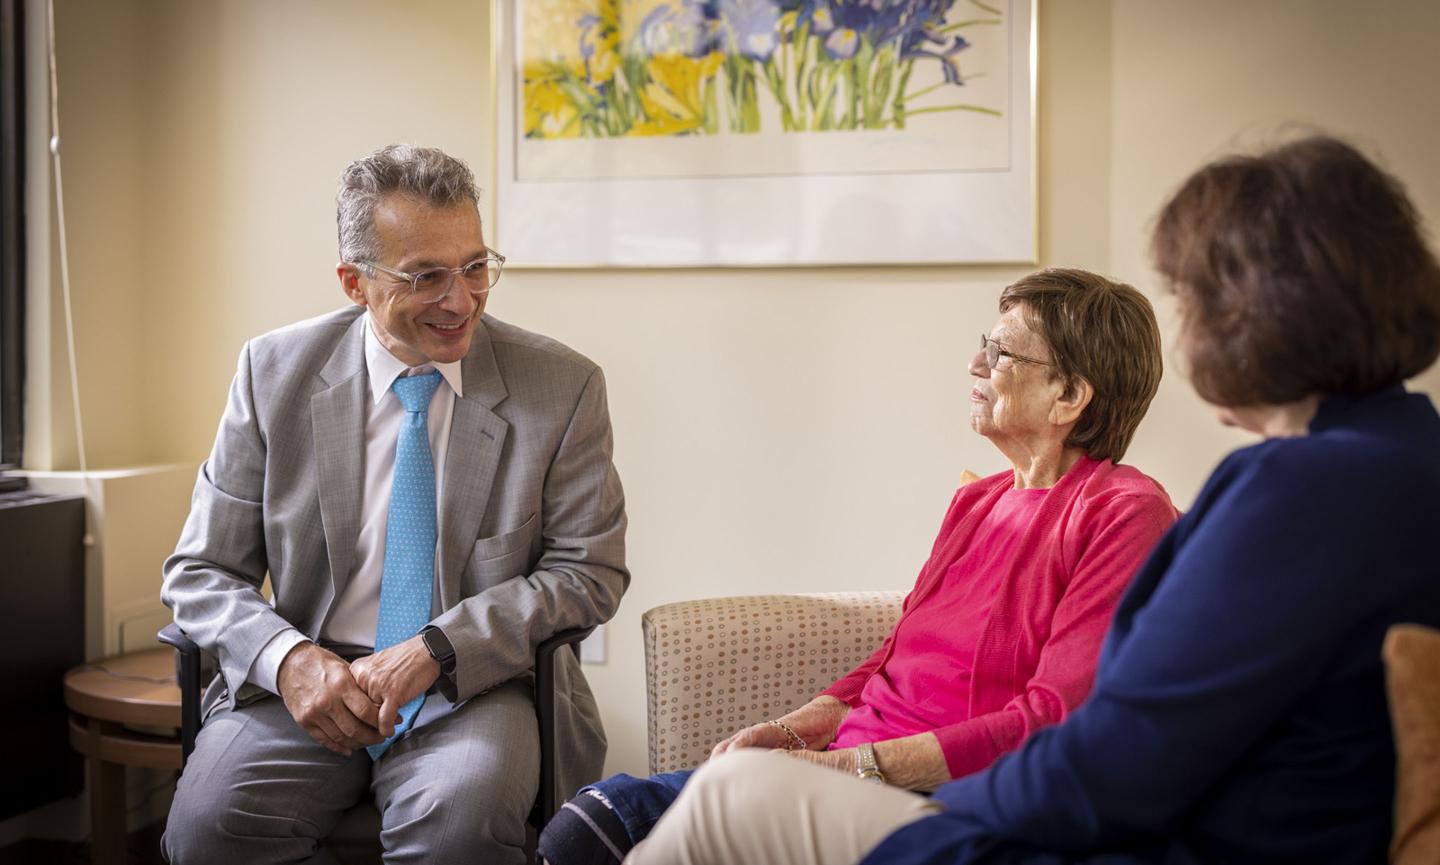 Dr. Alvaro Pascual-Leone of Hebrew SeniorLife’s Wolk Center for Memory Health in Boston speaks with a patient and the patient’s daughter.